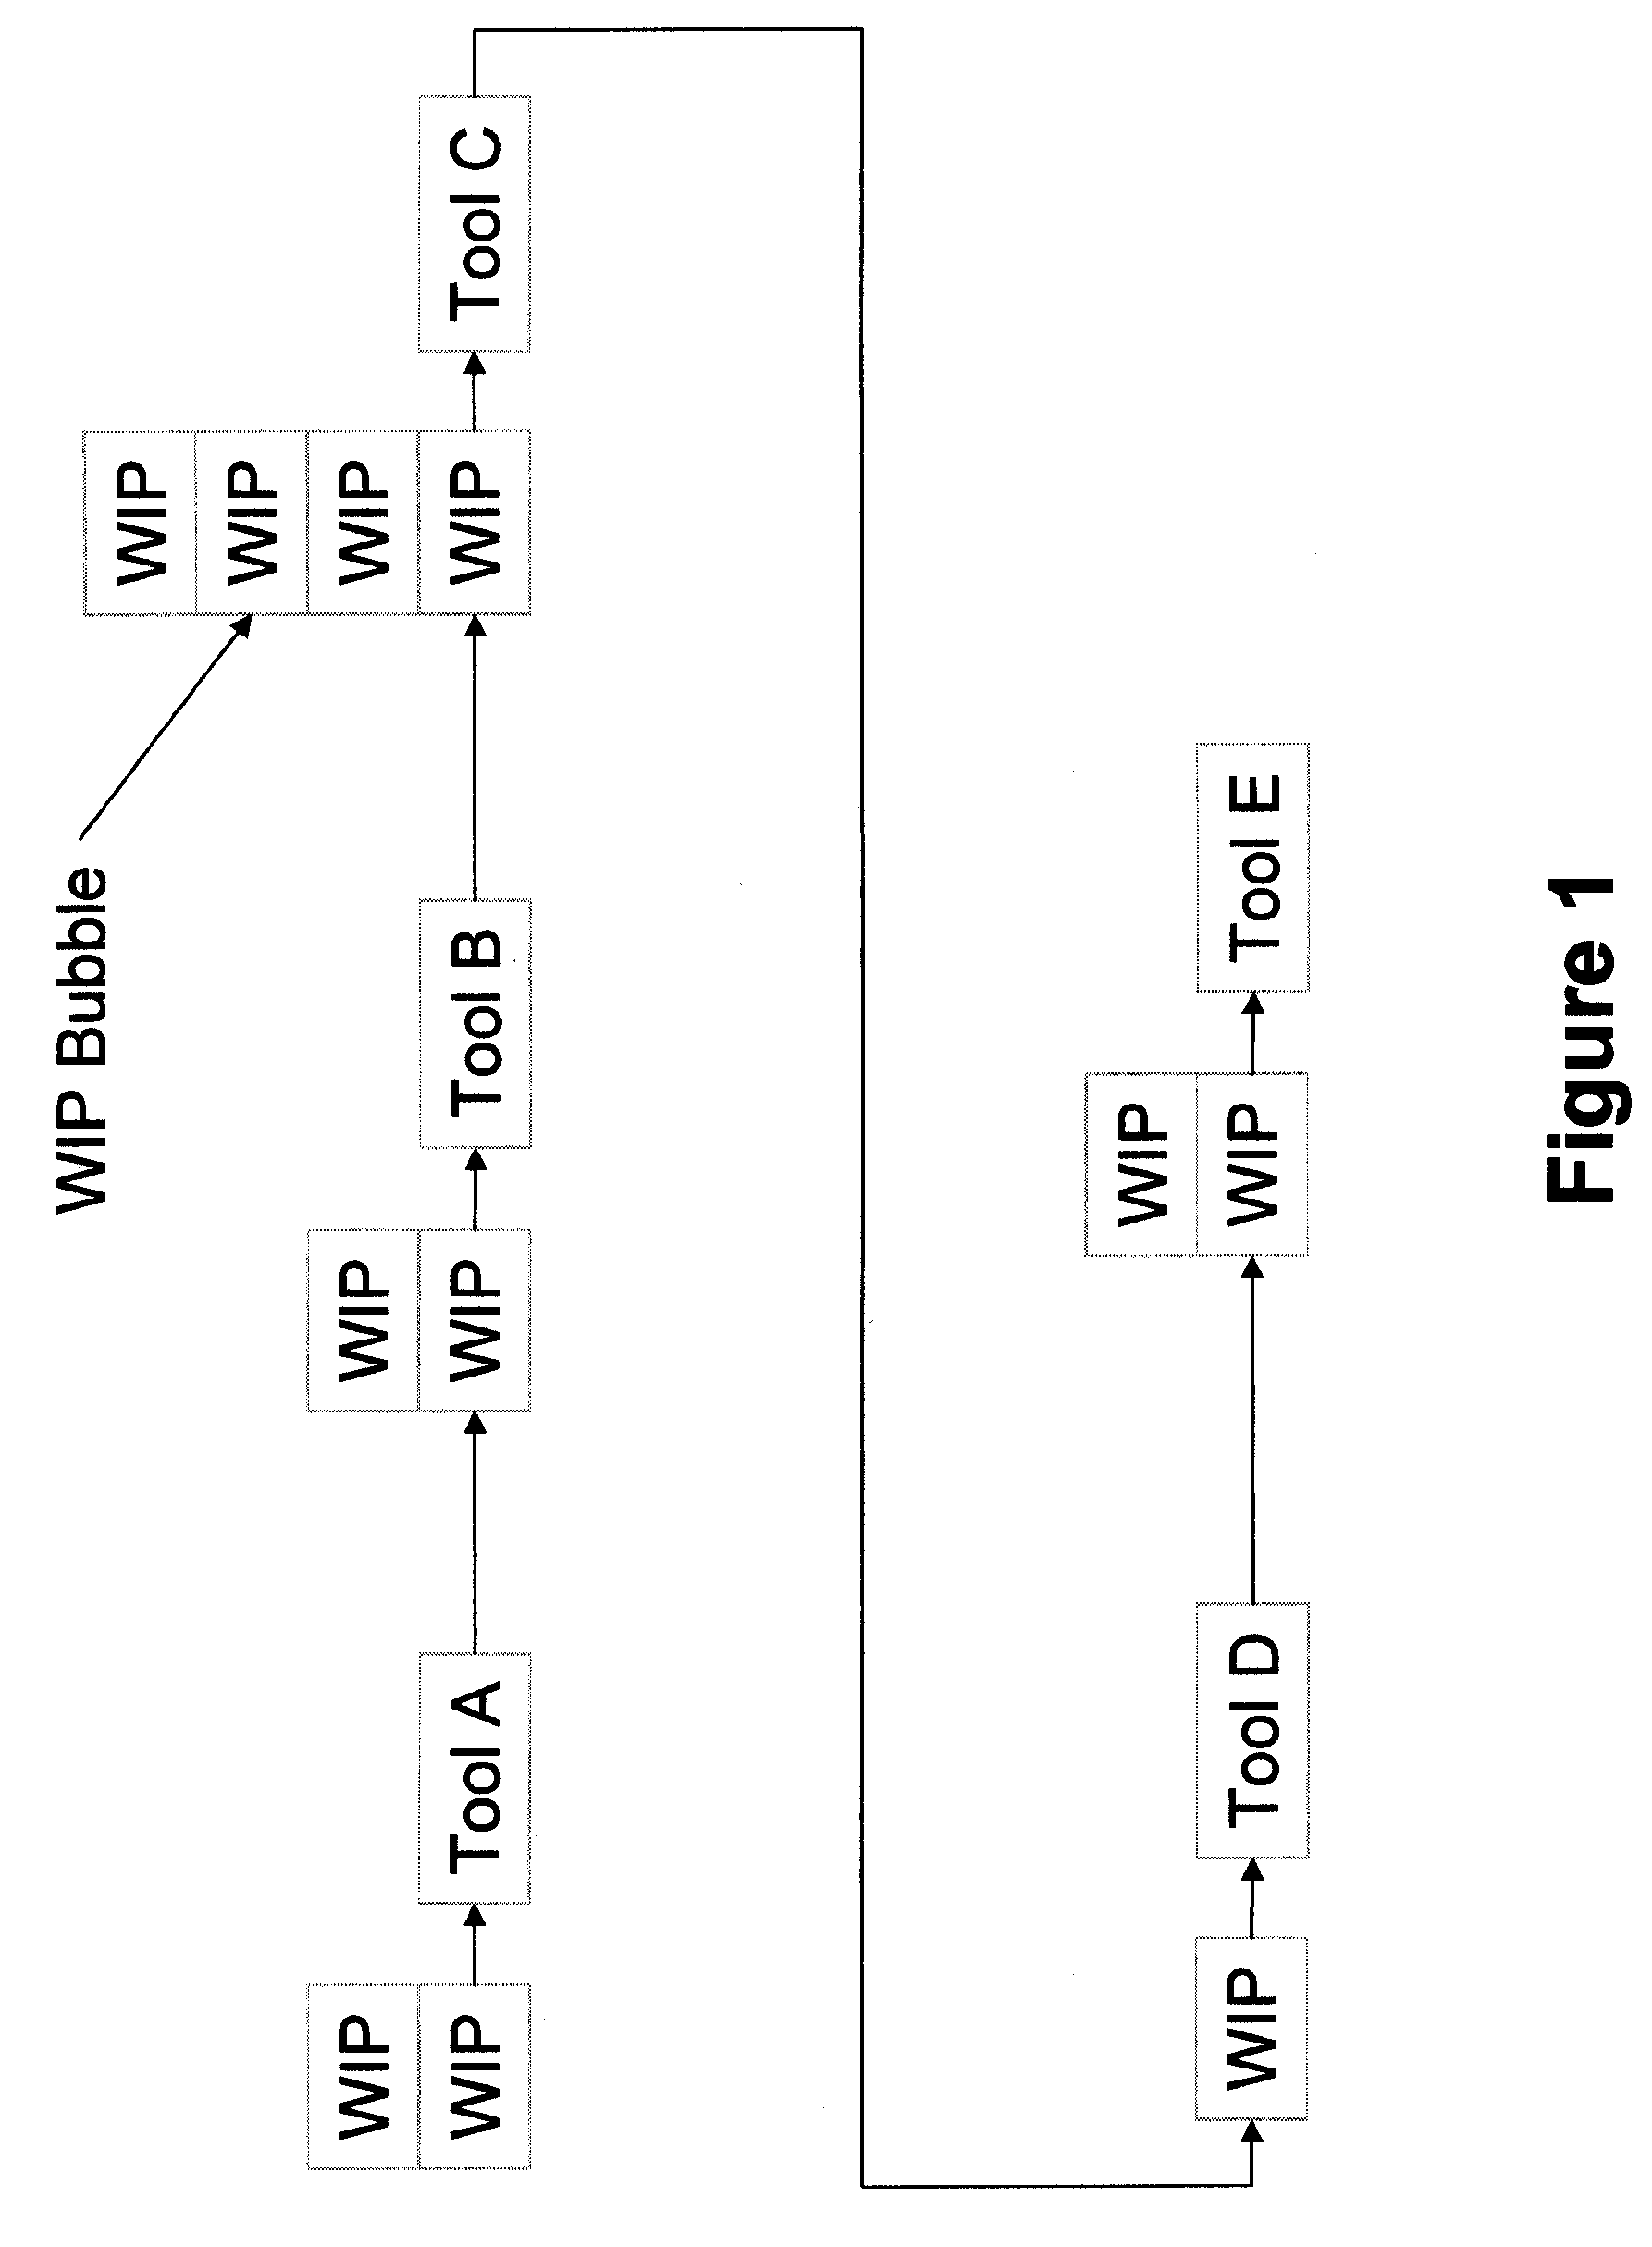 Method for autonomic control of a manufacturing system